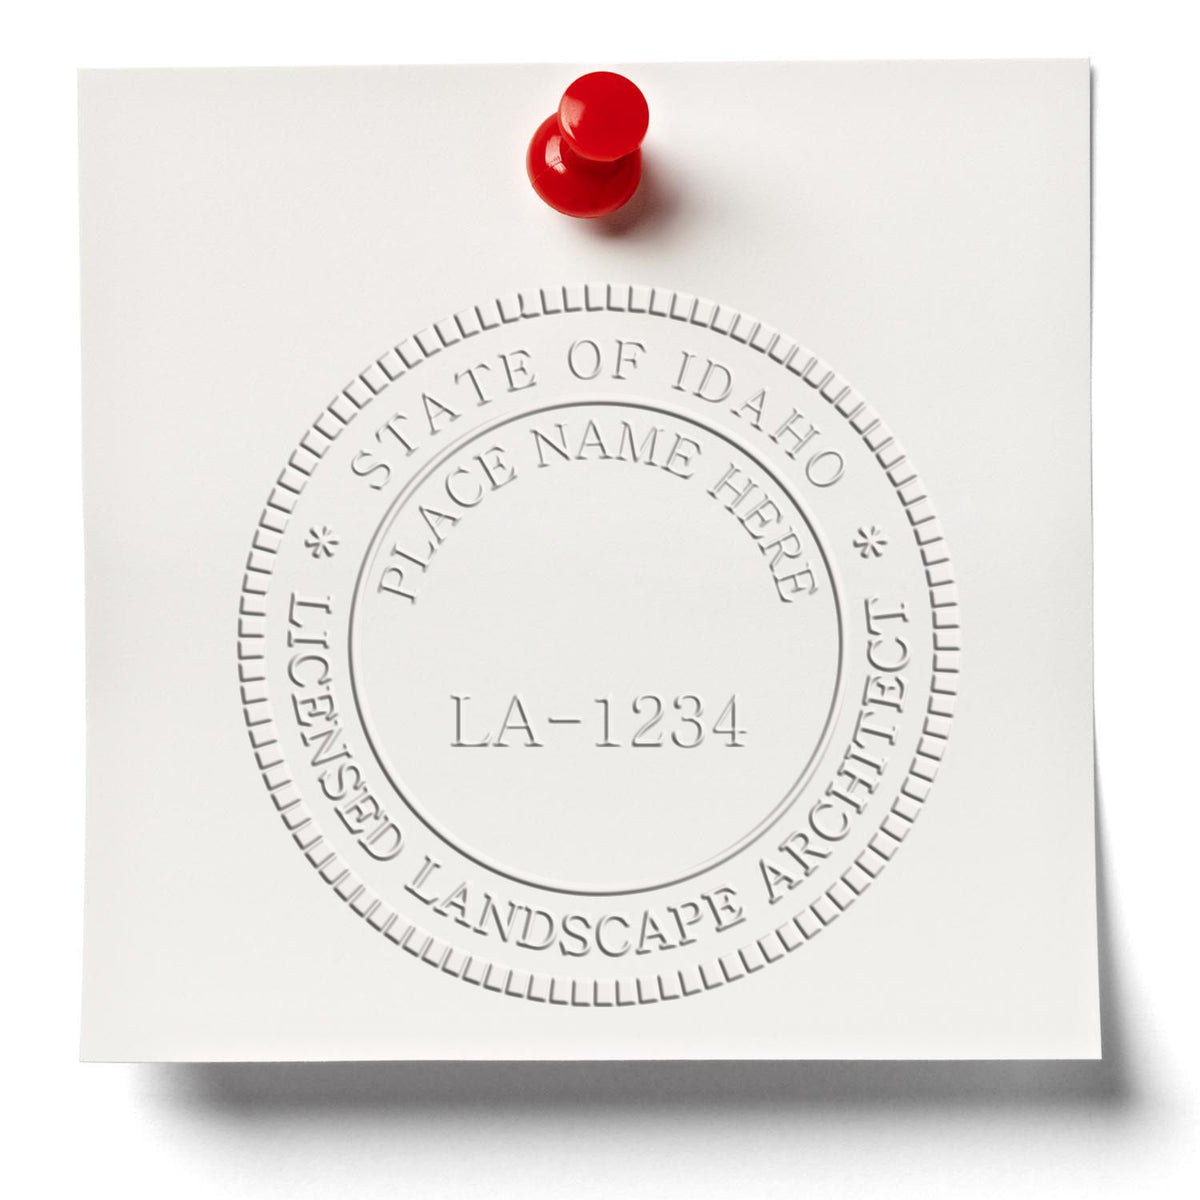 A photograph of the Hybrid Idaho Landscape Architect Seal stamp impression reveals a vivid, professional image of the on paper.